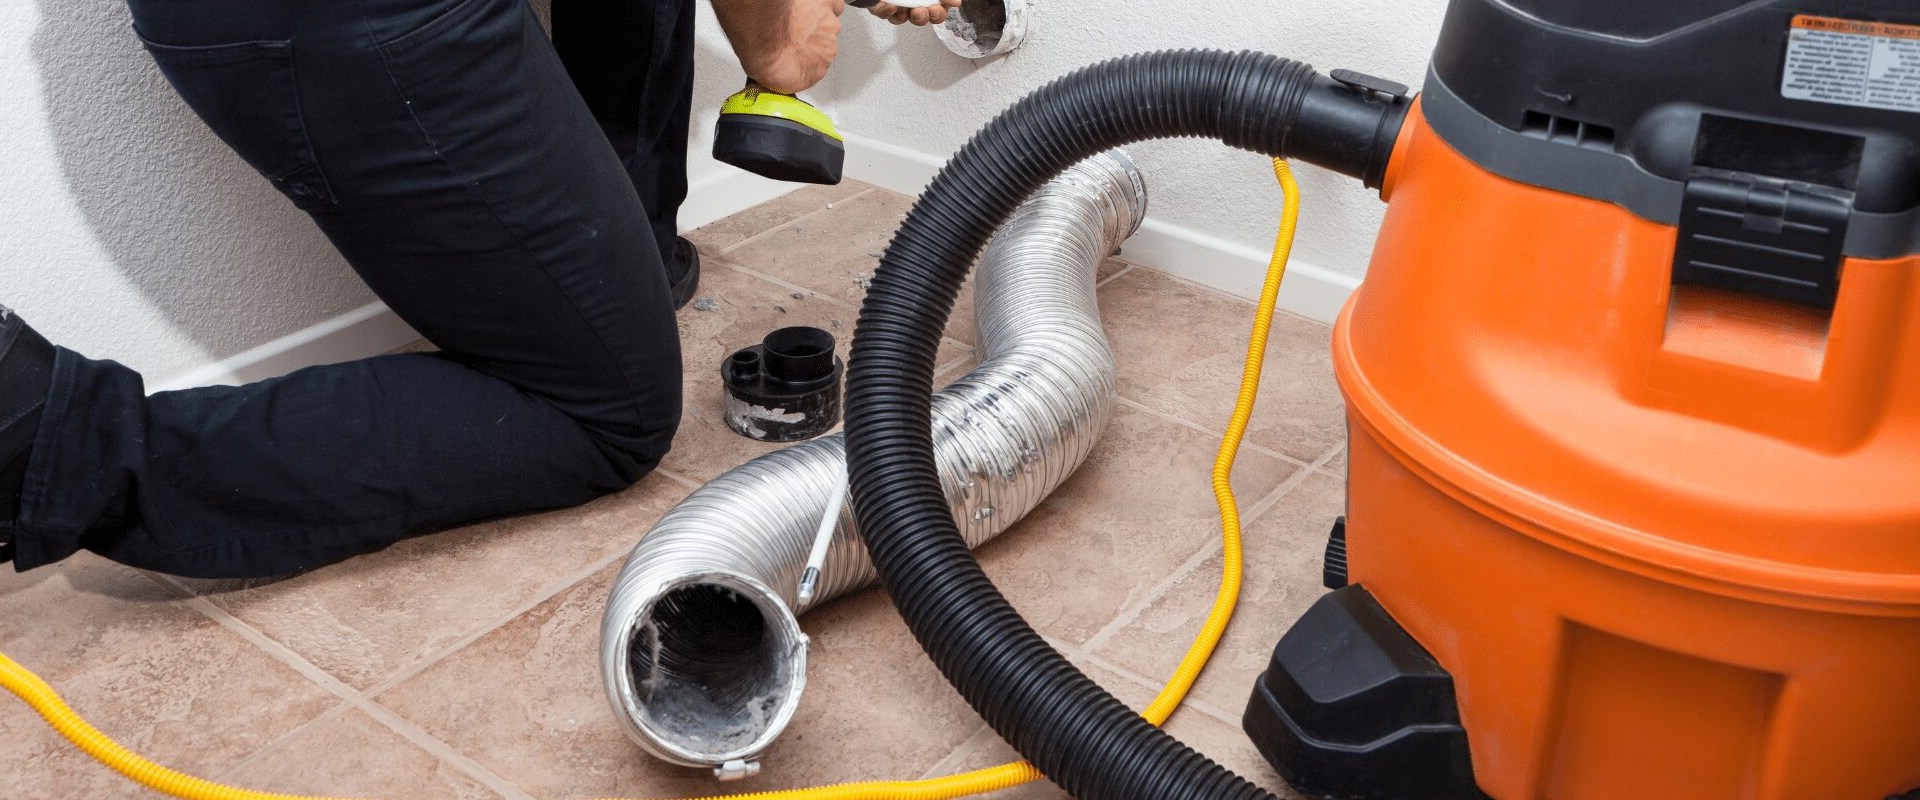 The Benefits of Professional Dryer Vent Cleaning: Why You Shouldn't Overlook It